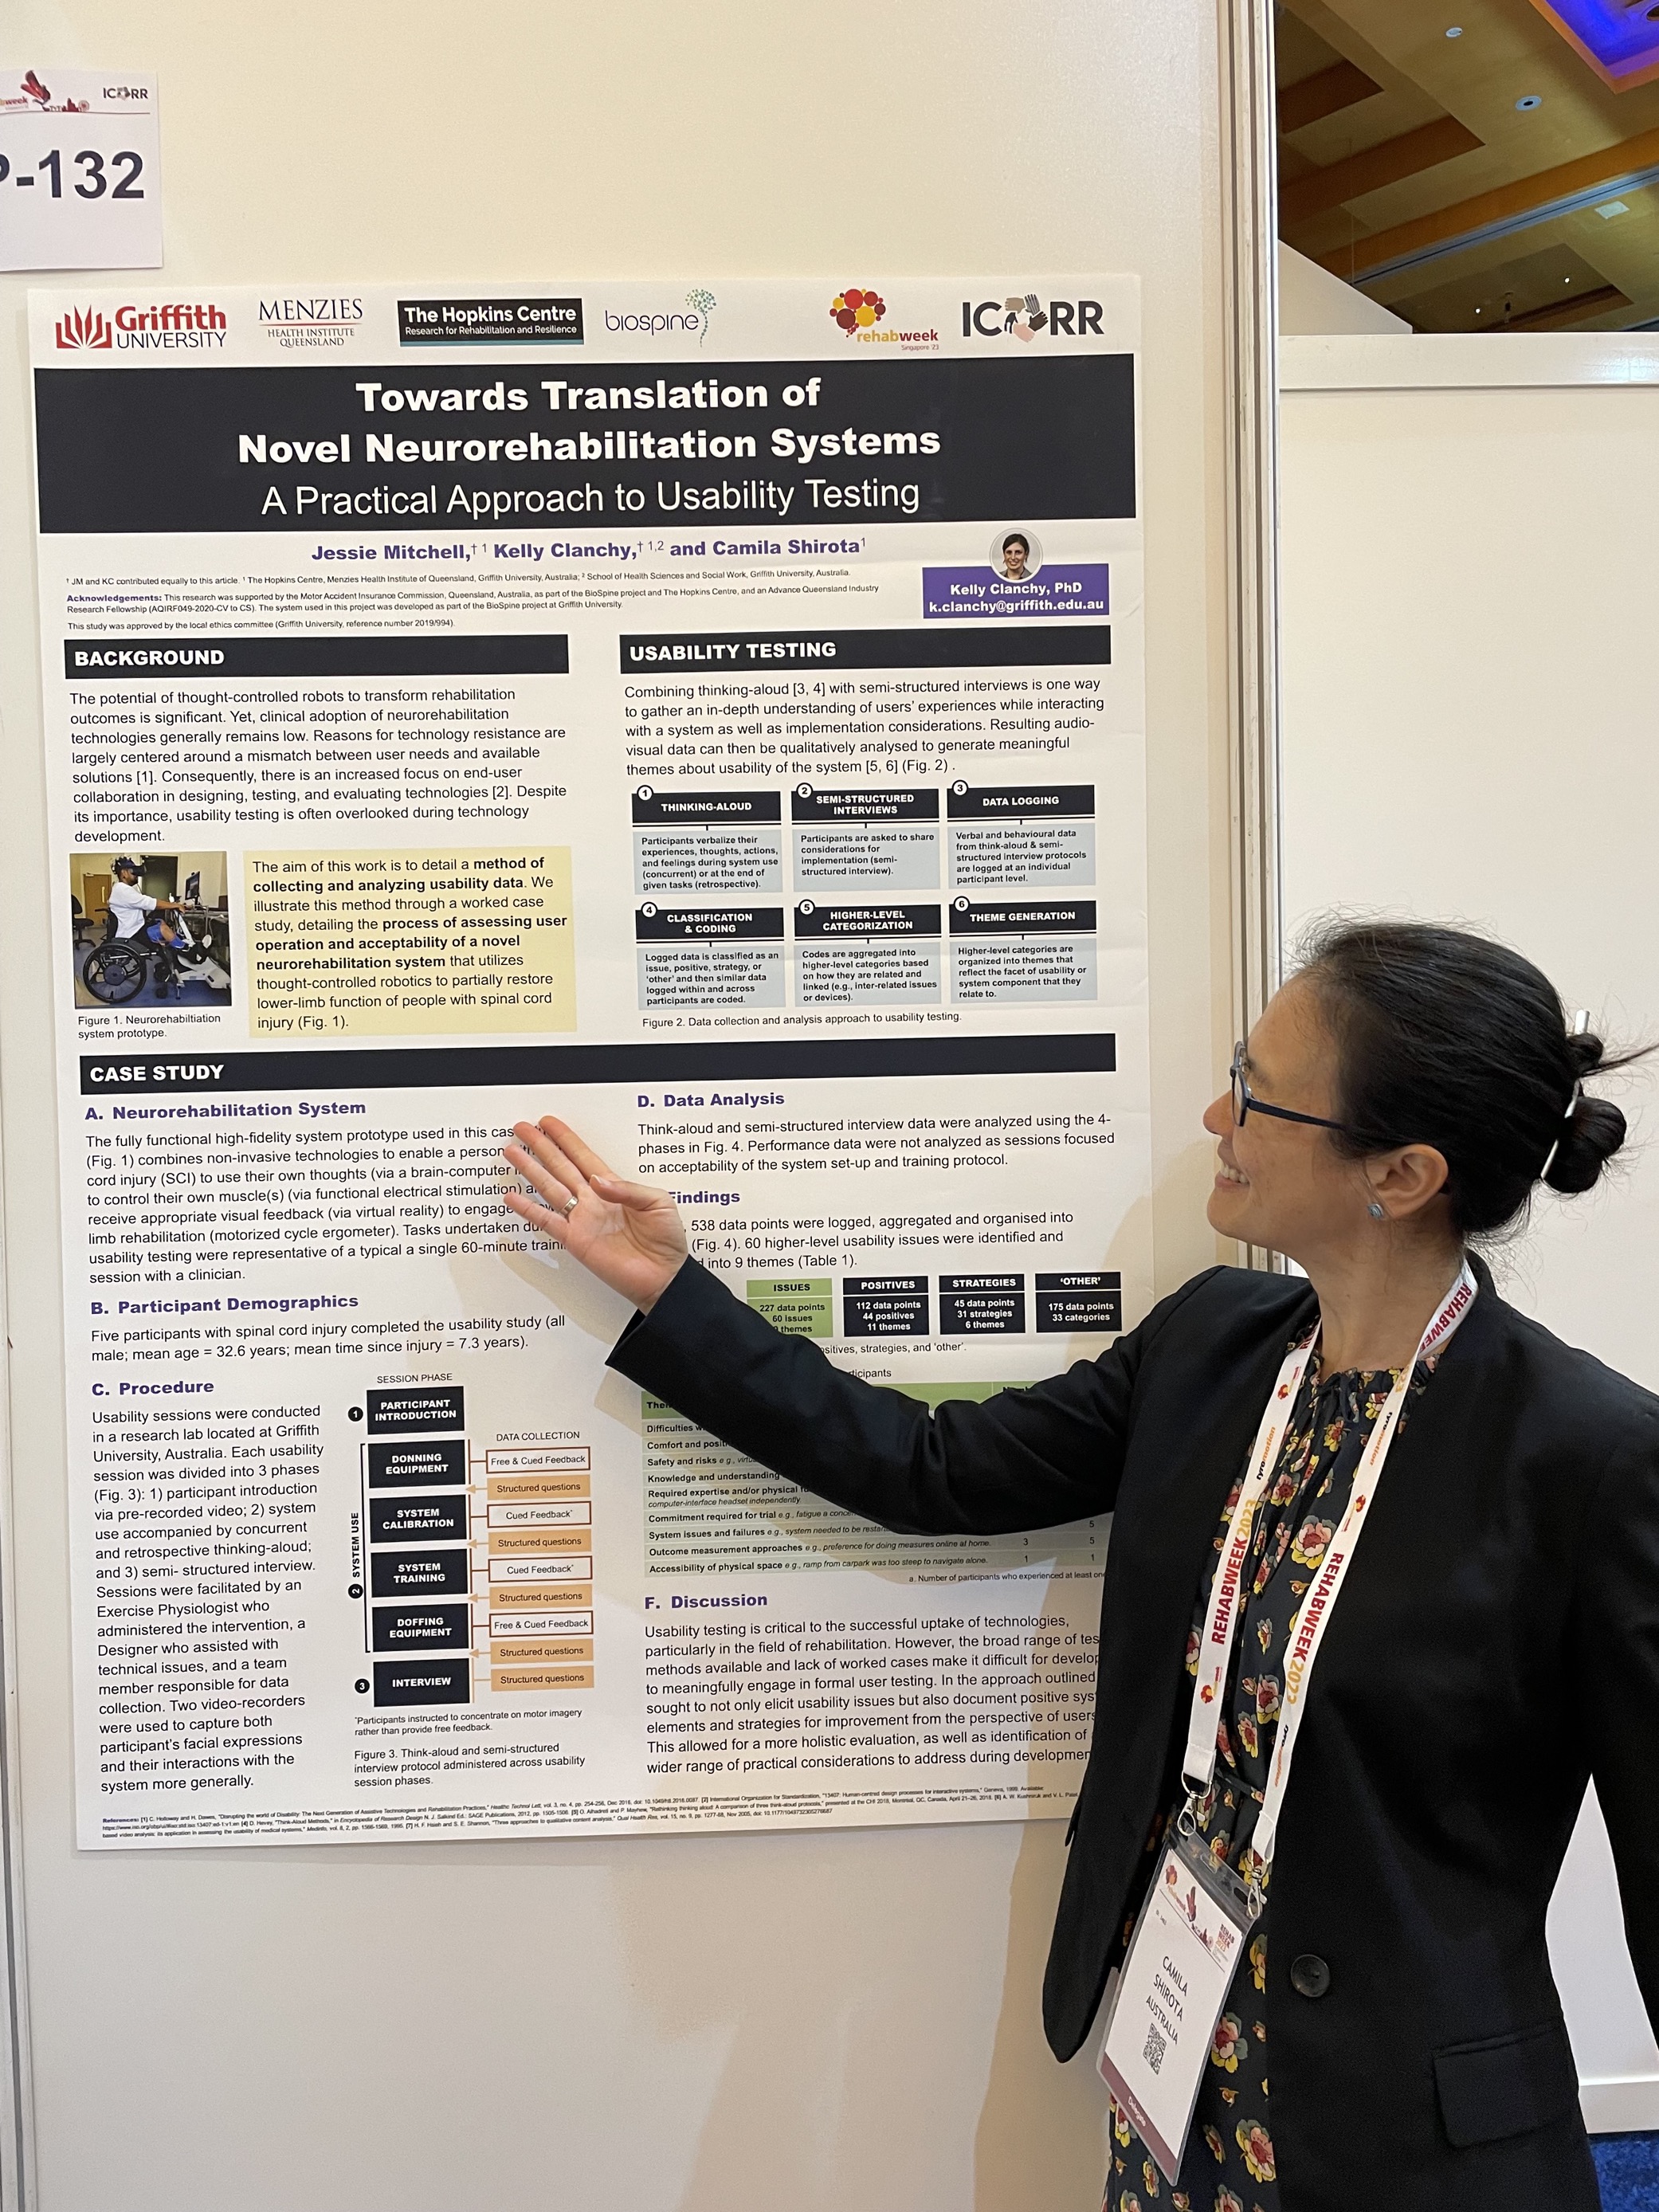 Camila Shirota, a woman with dark hair and glasses, wearing a floral dress with a black jacket faces side on to the camera, looking at the poster entitled “Towards Translation of Novel Neurorehabilitation Systems – A practical Approach to Usability Testing” 